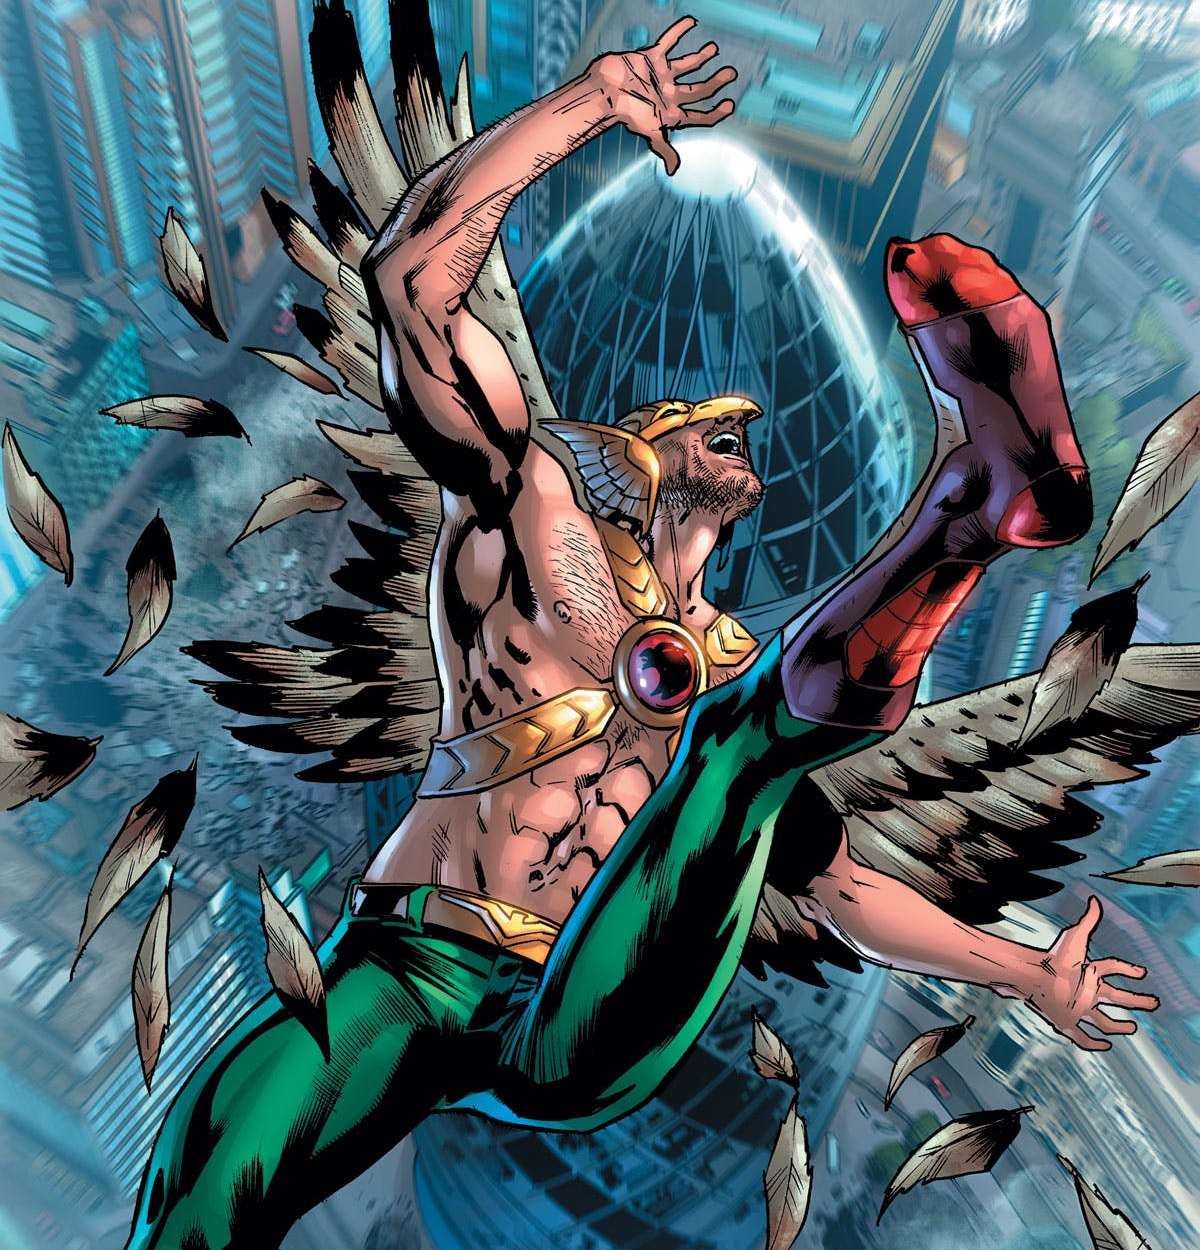 Hawkman #10 review: The epiphany